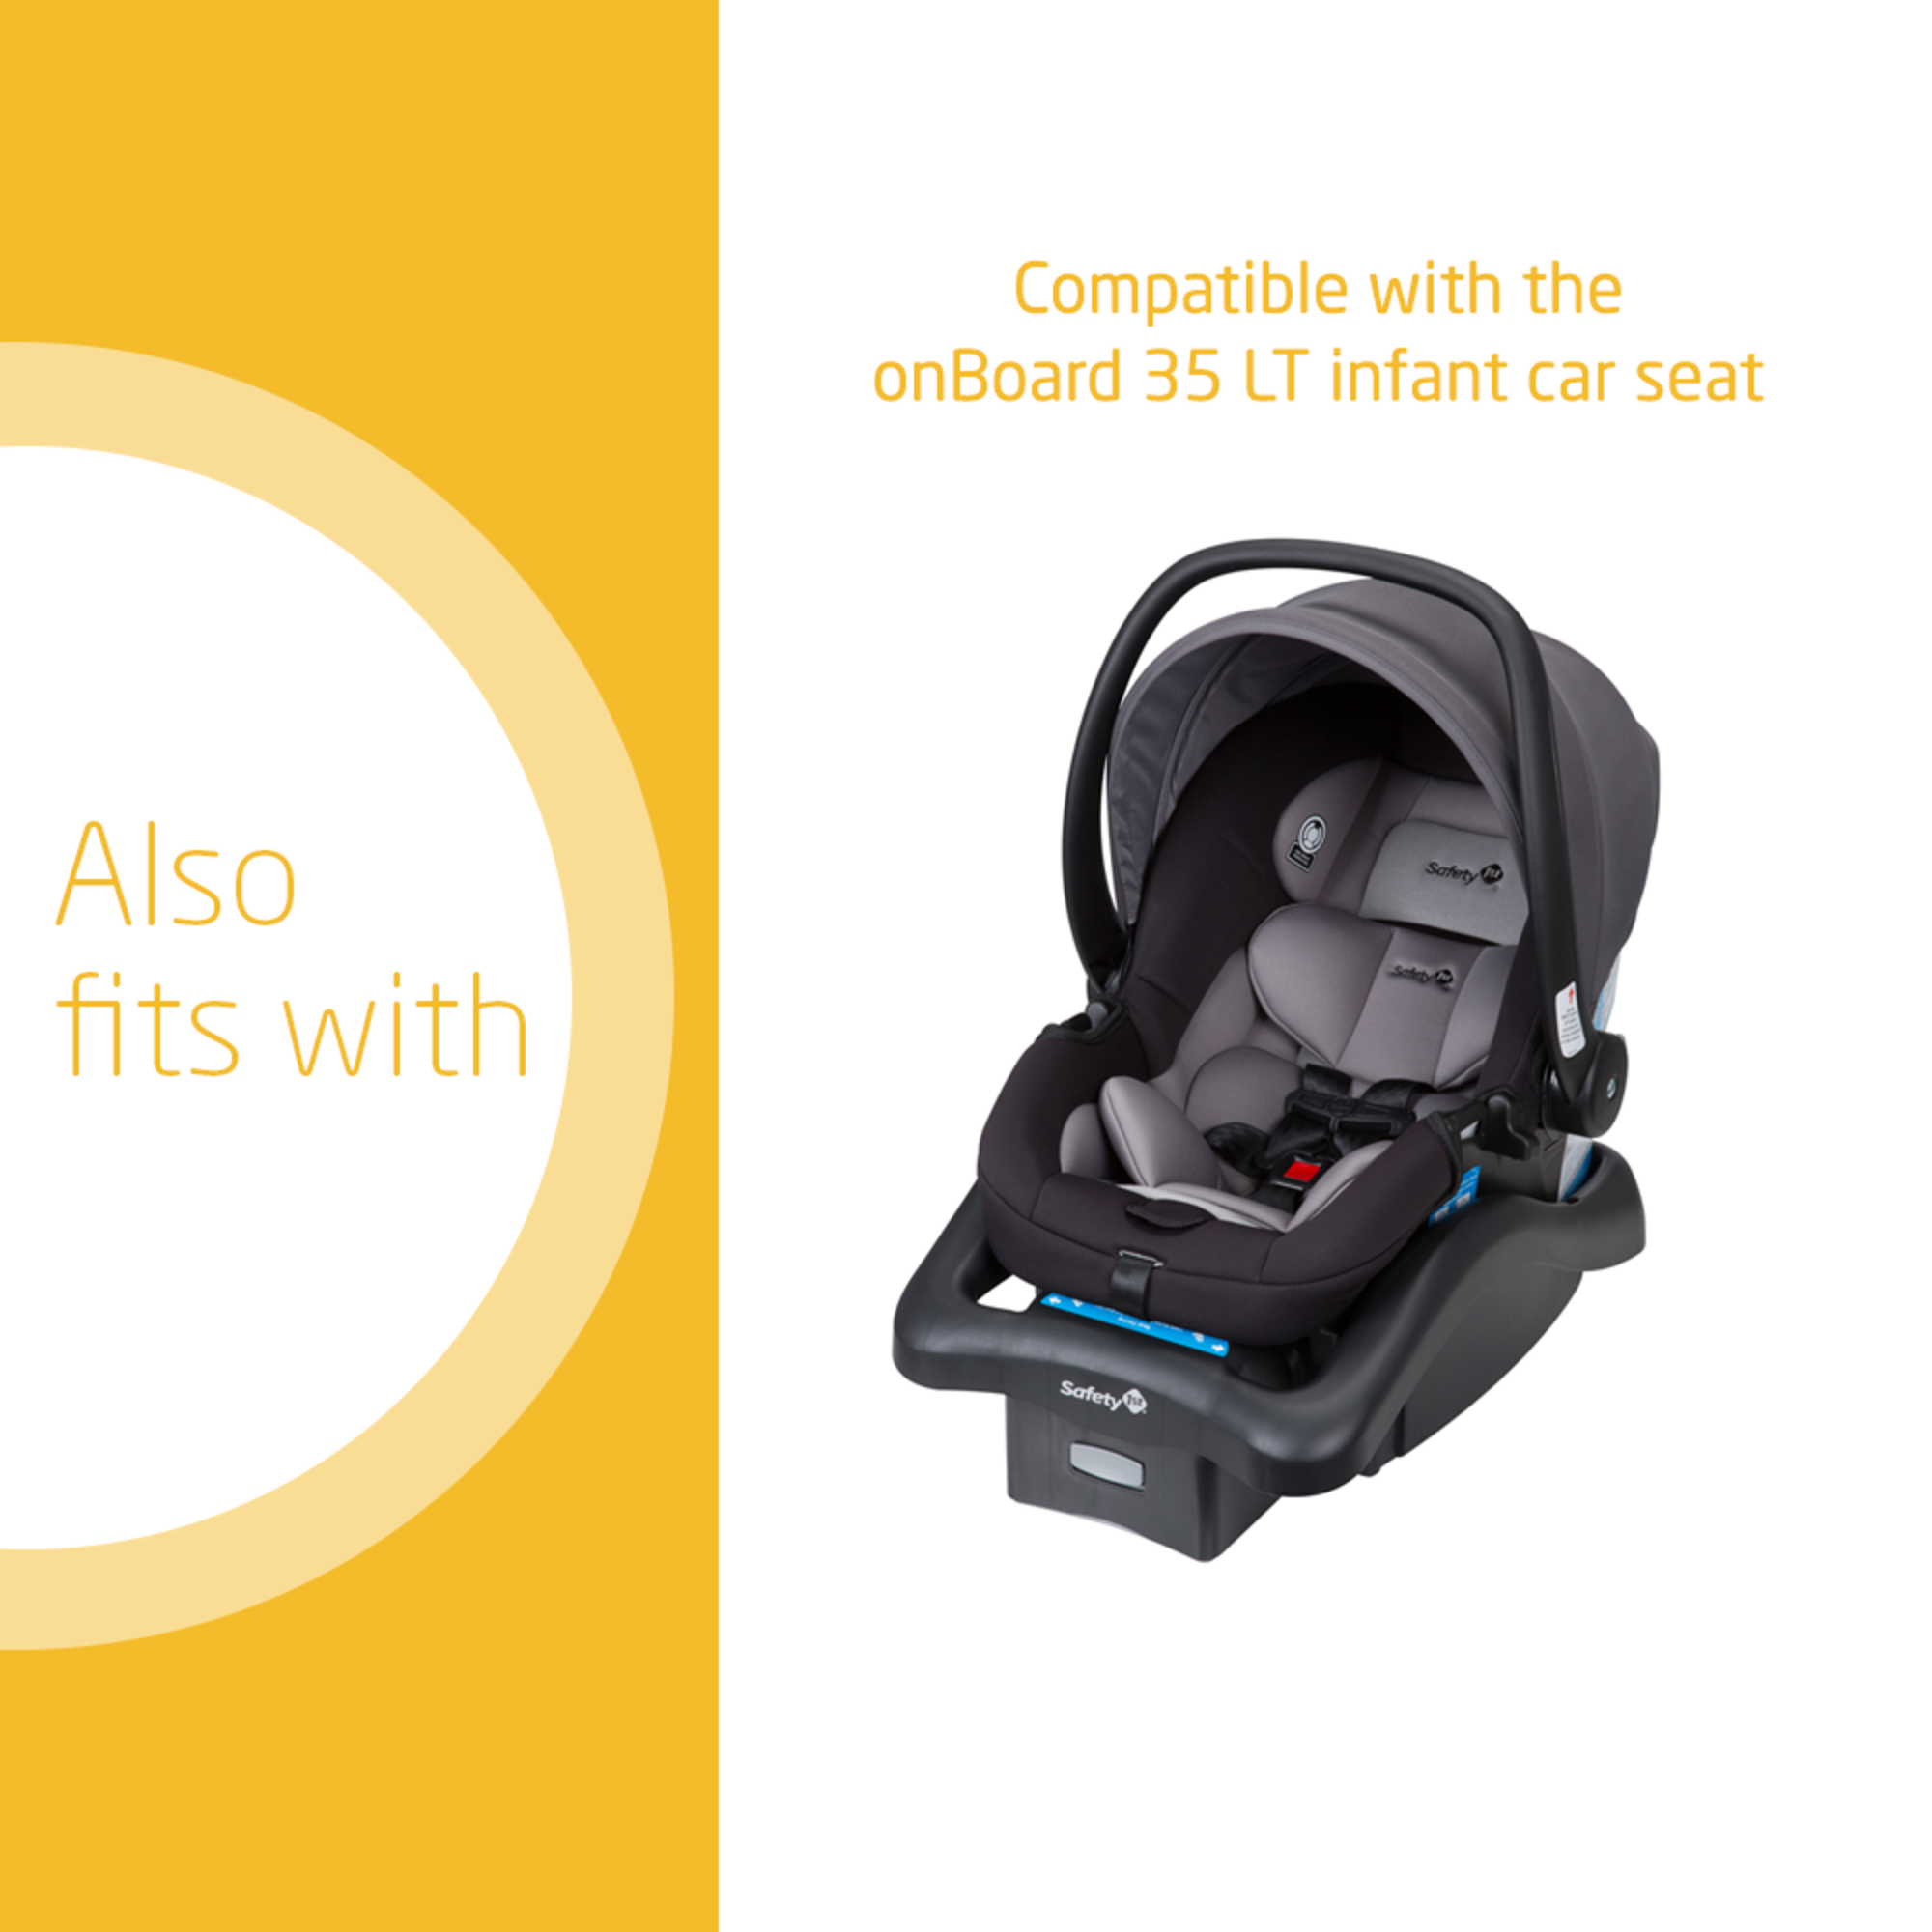 Also fits with: Compatible with the onBoard 35 LT infant car seat